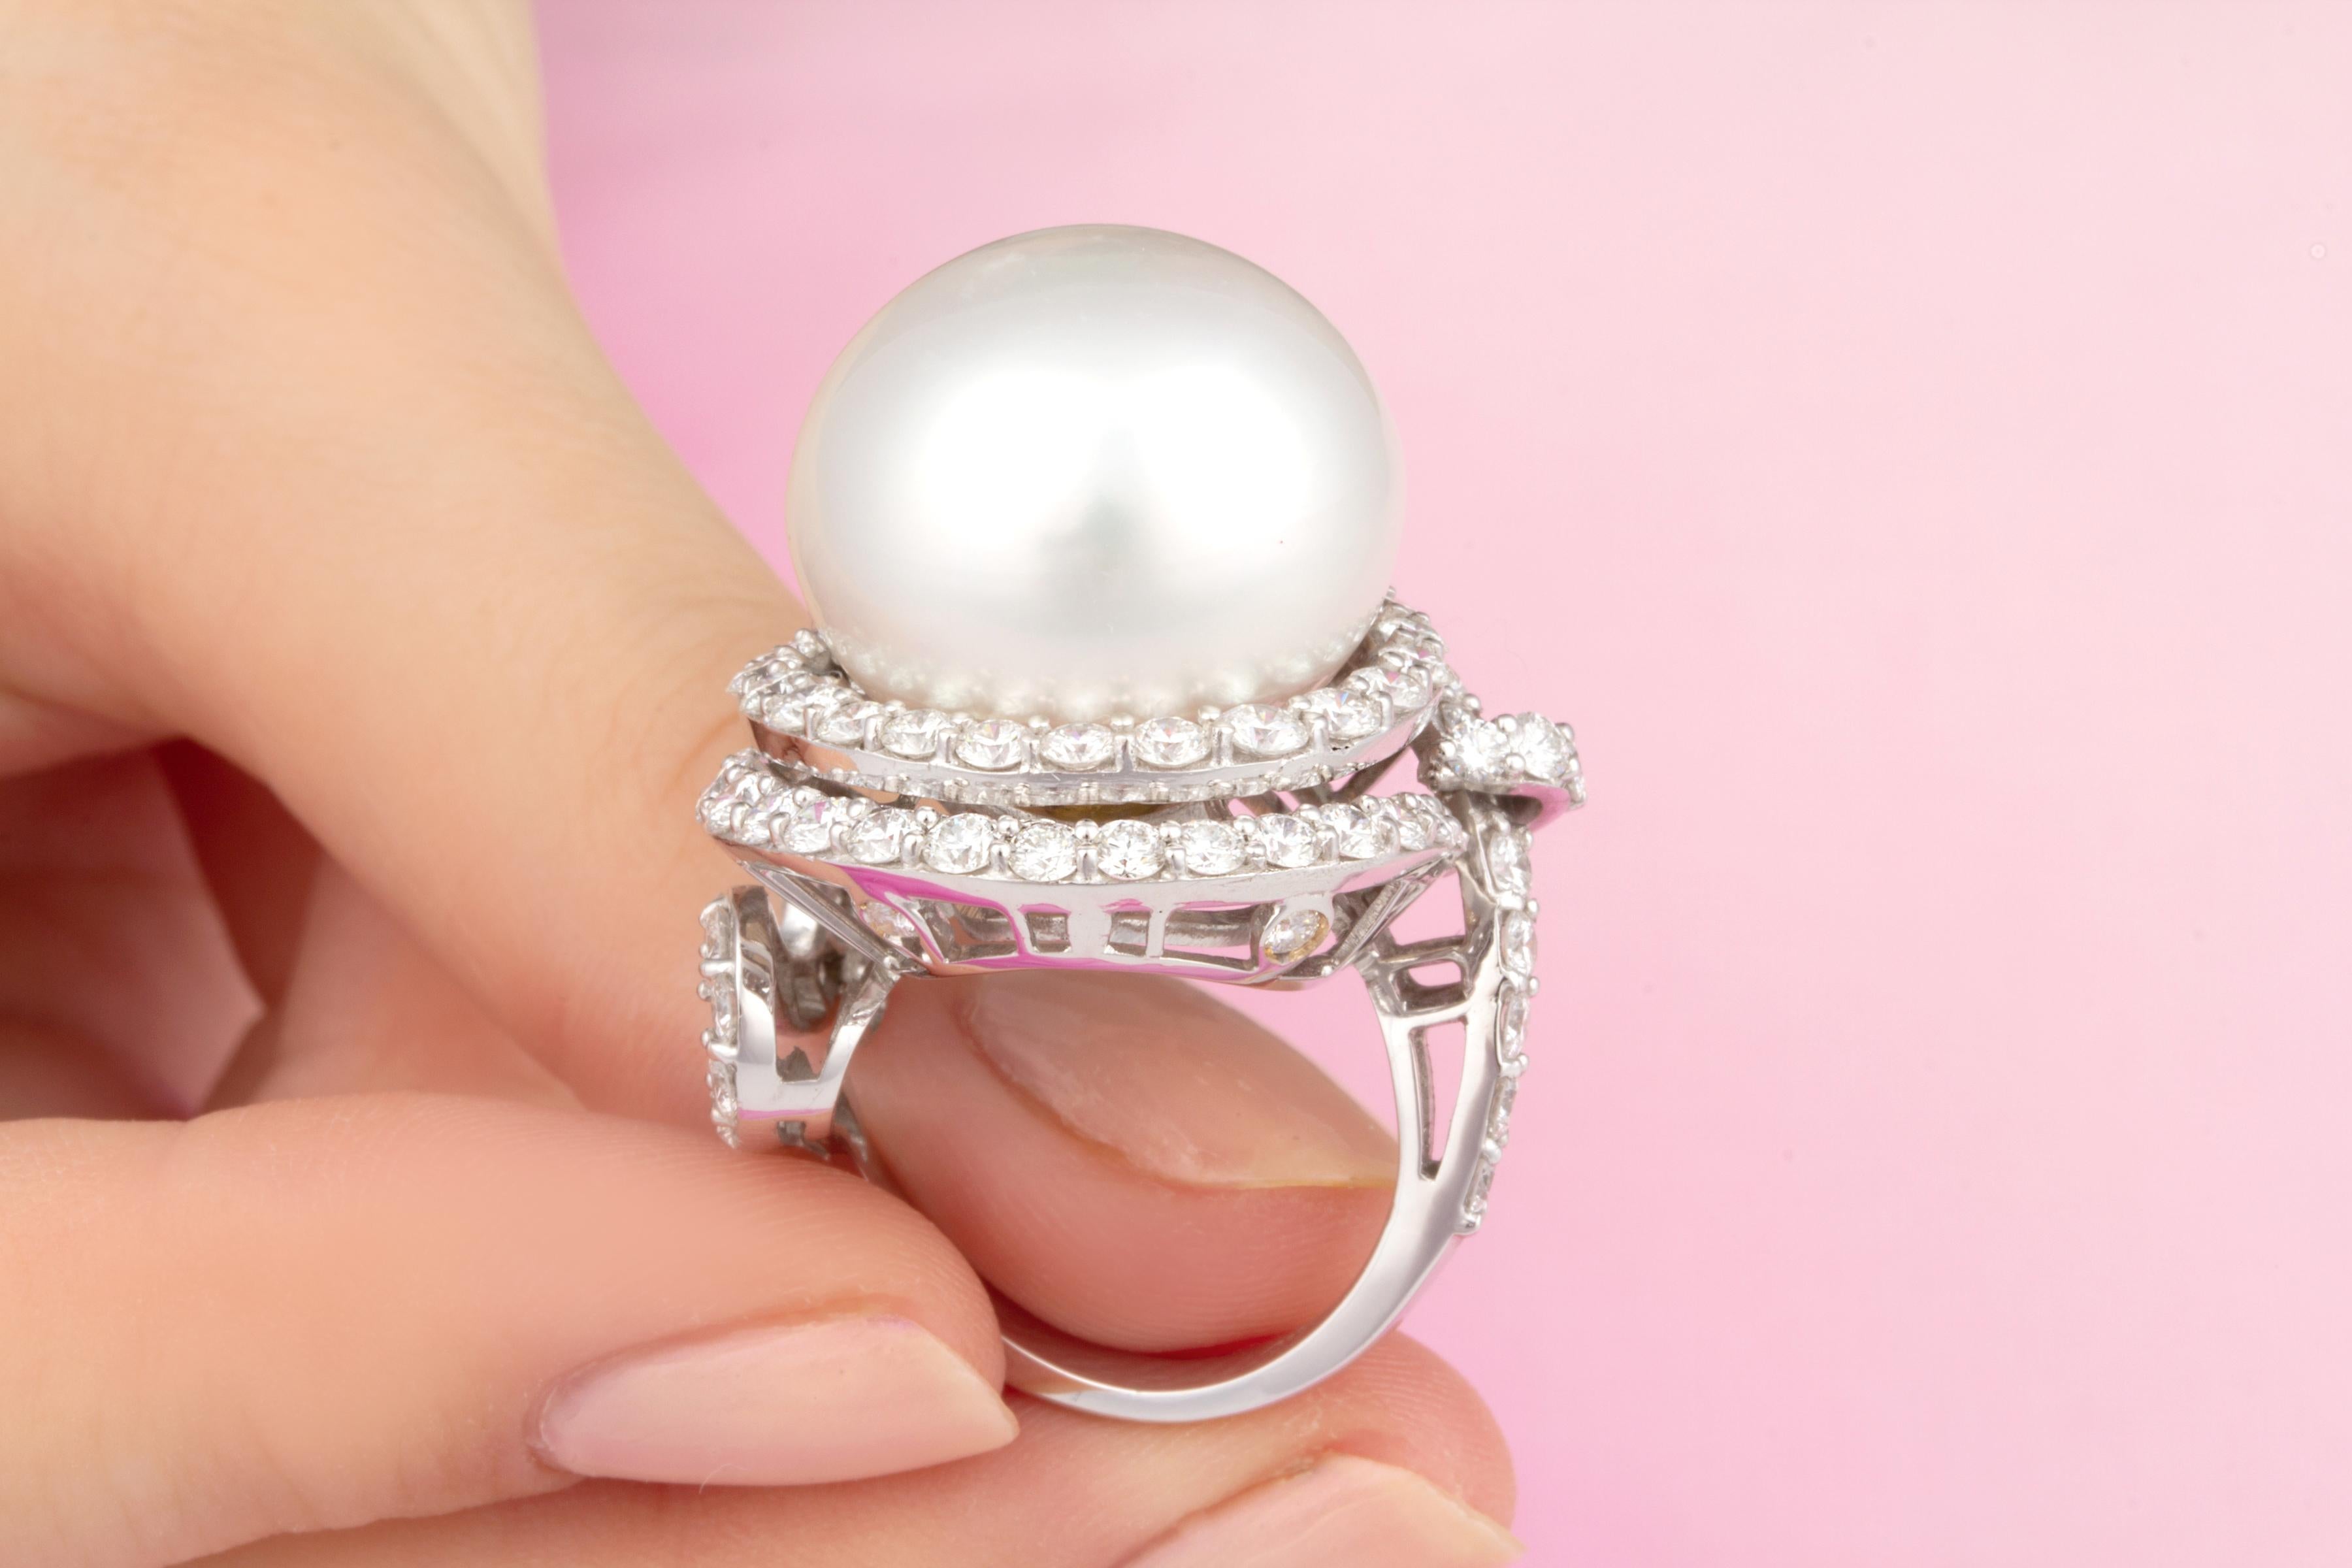 Brilliant Cut Ella Gafter 19mm South Sea Pearl Diamond Cocktail Ring For Sale